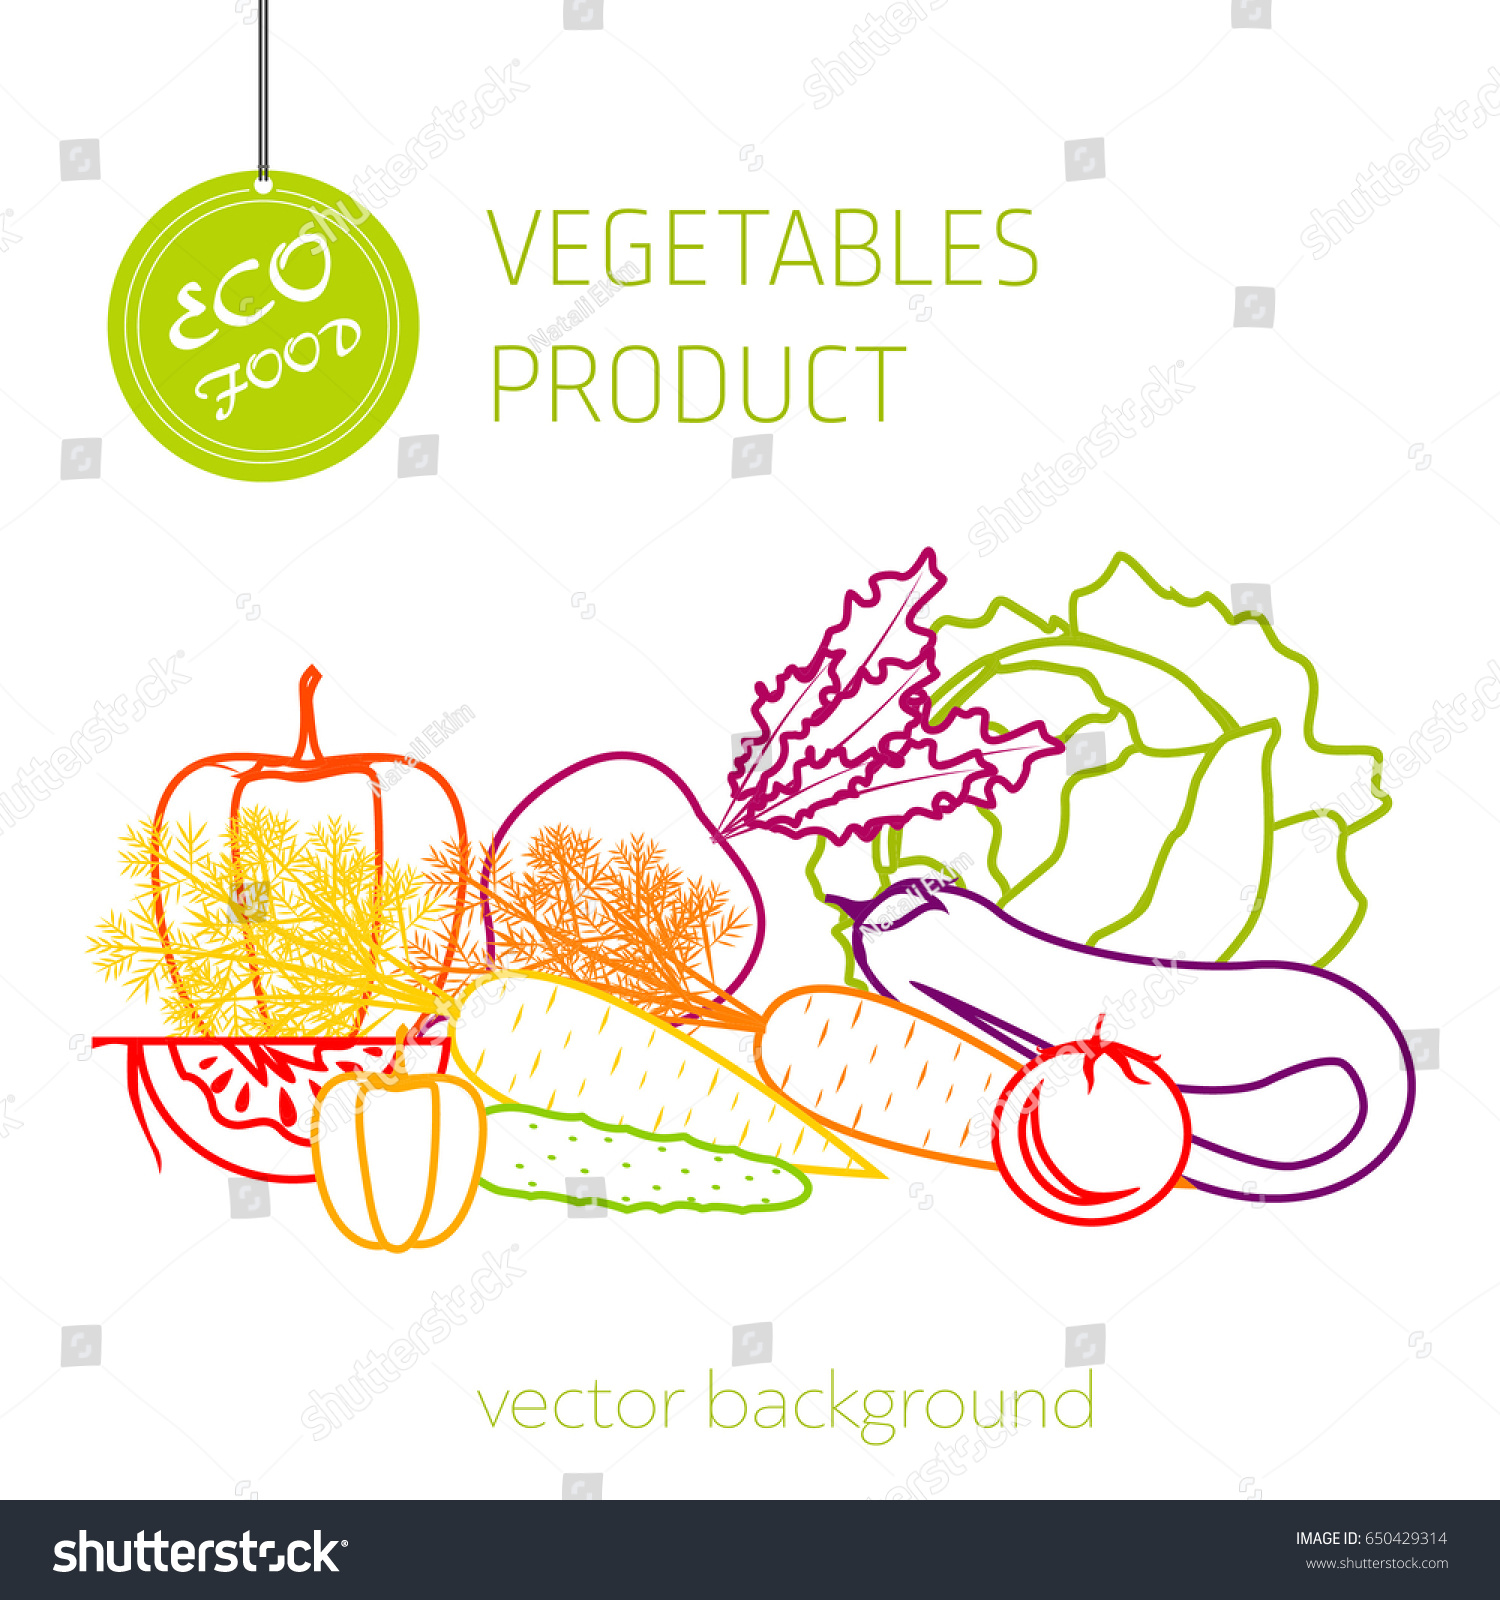 Cabbage, carrot, pepper, cucumber, eggplant, beet, tomato, vegetable set, vector background, fresh vegetables, healthy diet, greeting card
 #650429314